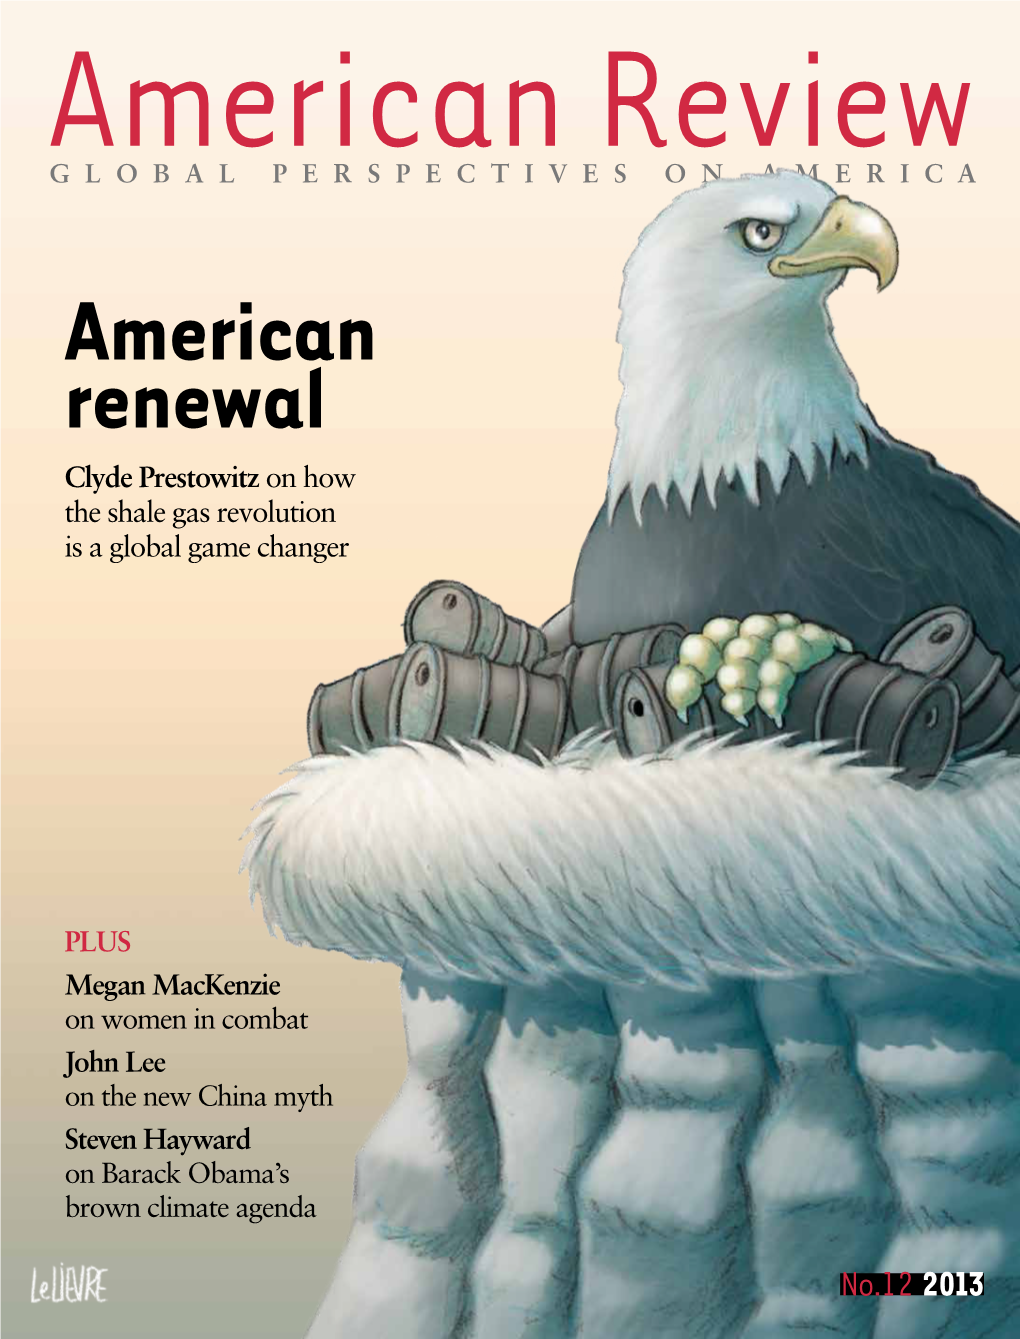 No.12 2013 American Review Global Perspectives on AMERICA / MAY–AUG 2013 / ISSUE 12